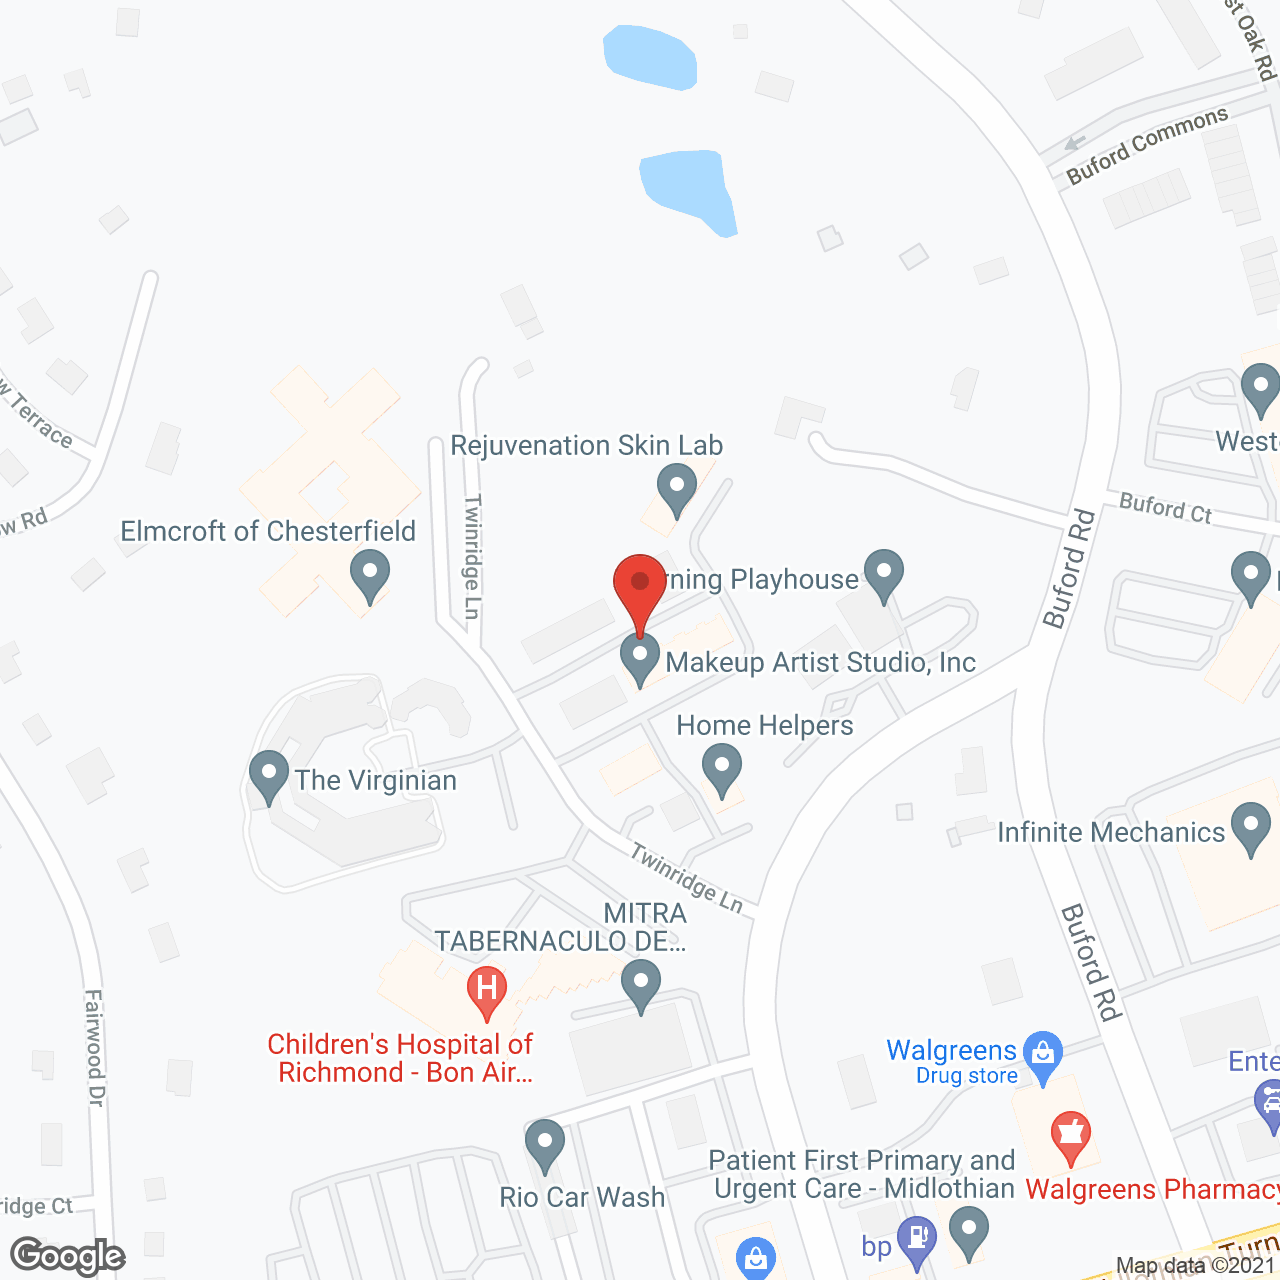 Home Helpers Home Care of Richmond, VA in google map